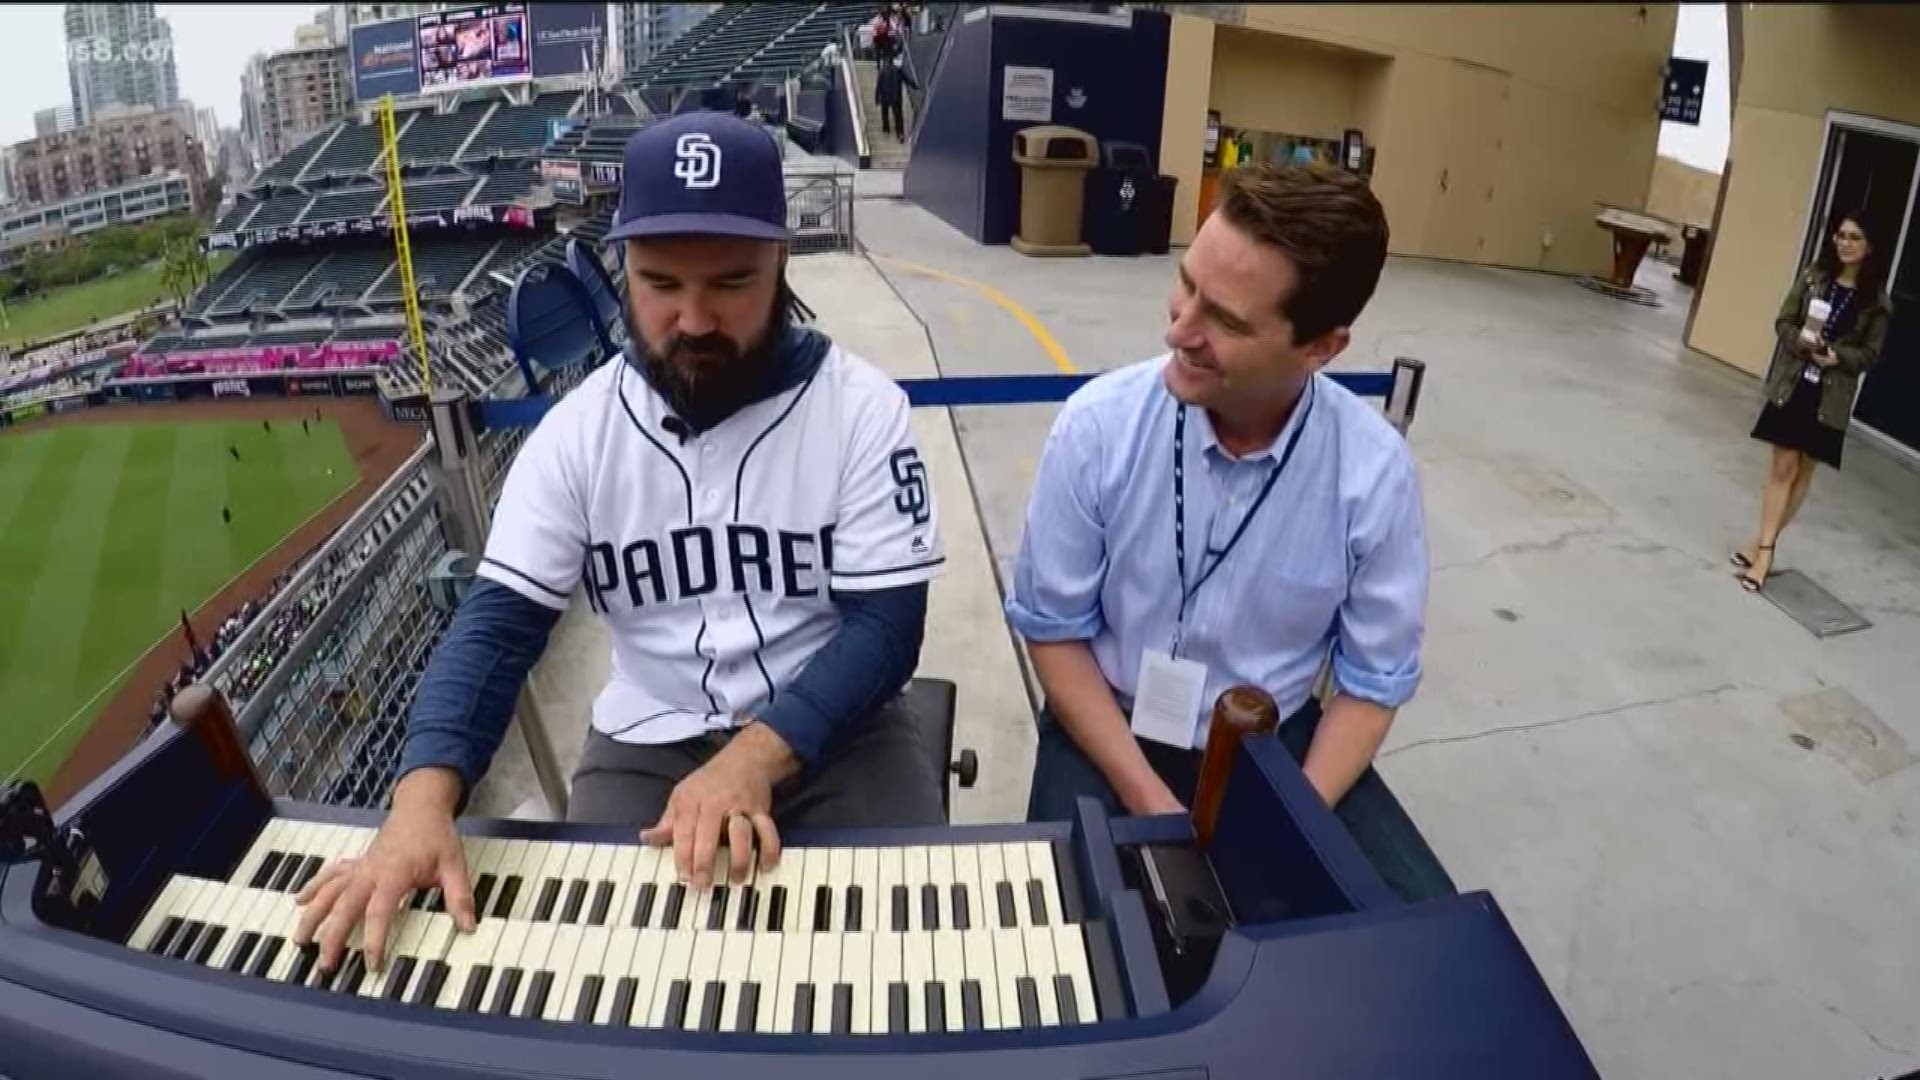 "It is the probably the coolest job in San Diego. I get to play music, which is what I love, and I get to do it while watching baseball at the same time."